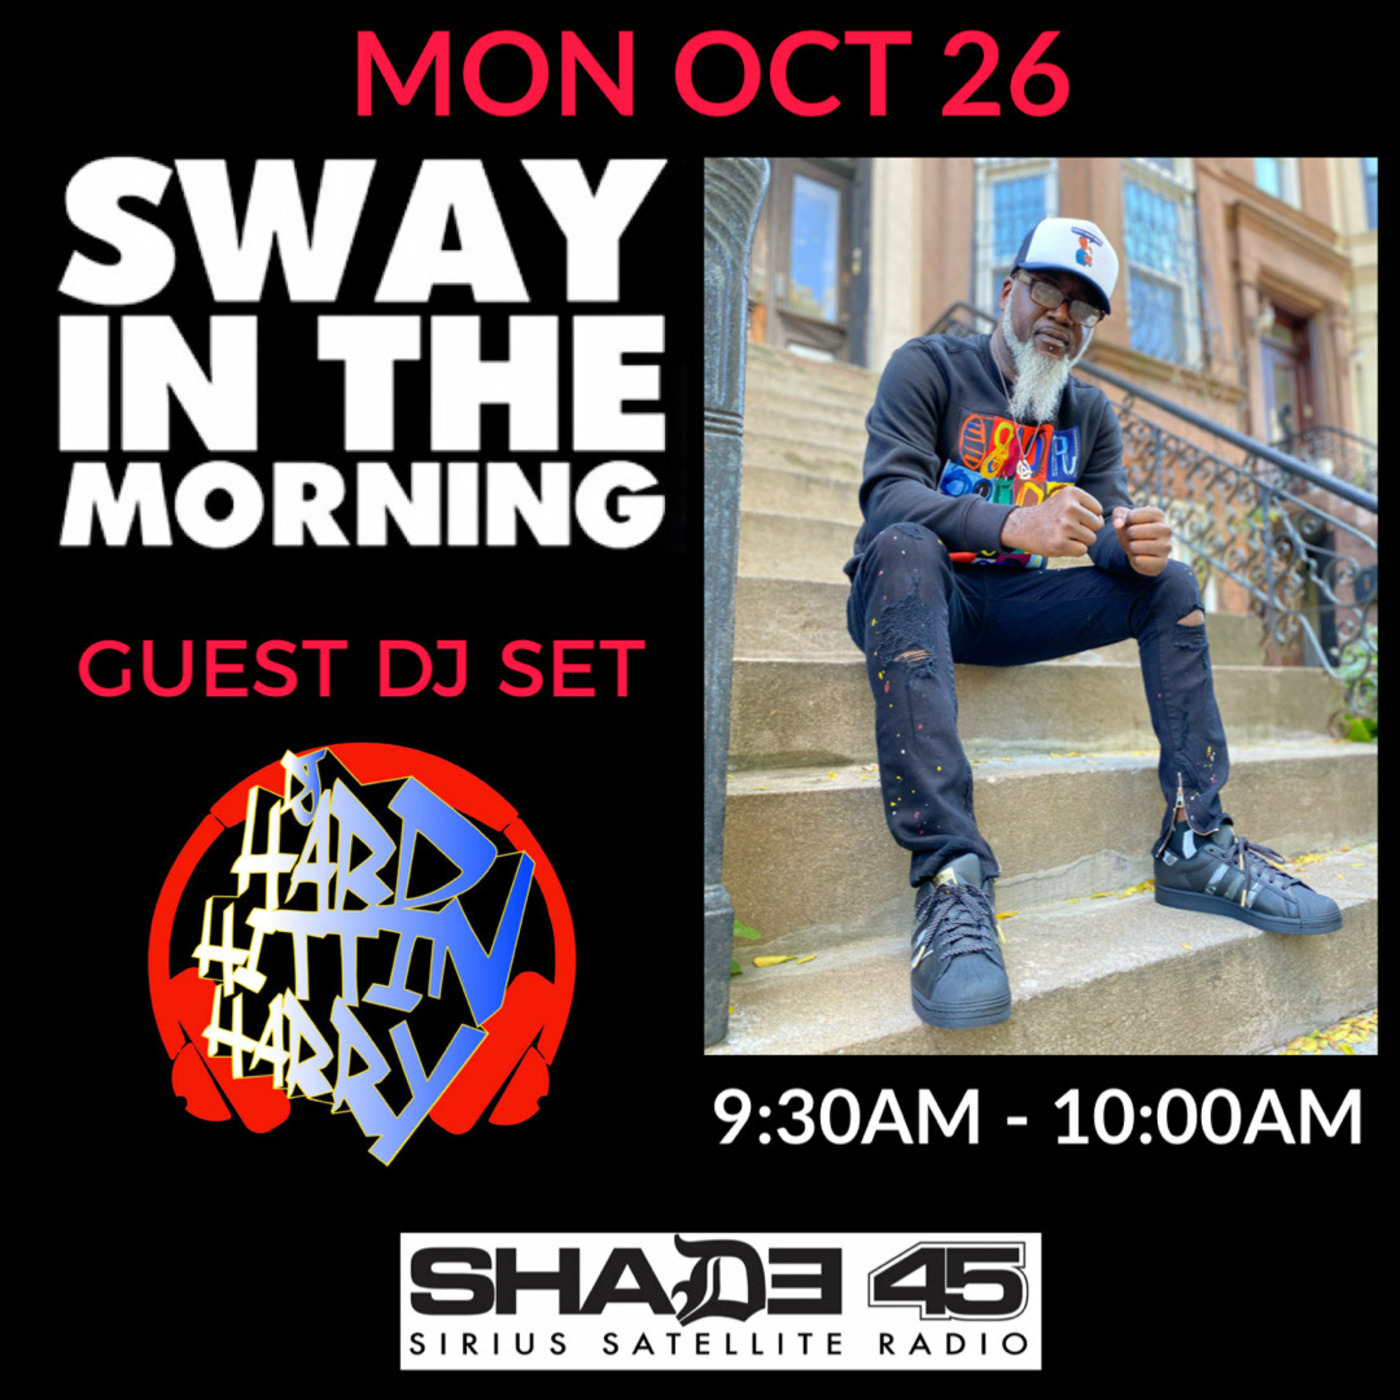 Sway In The Morning (Shade 45) Guest DJ -> Hard Hittin Harry Mix